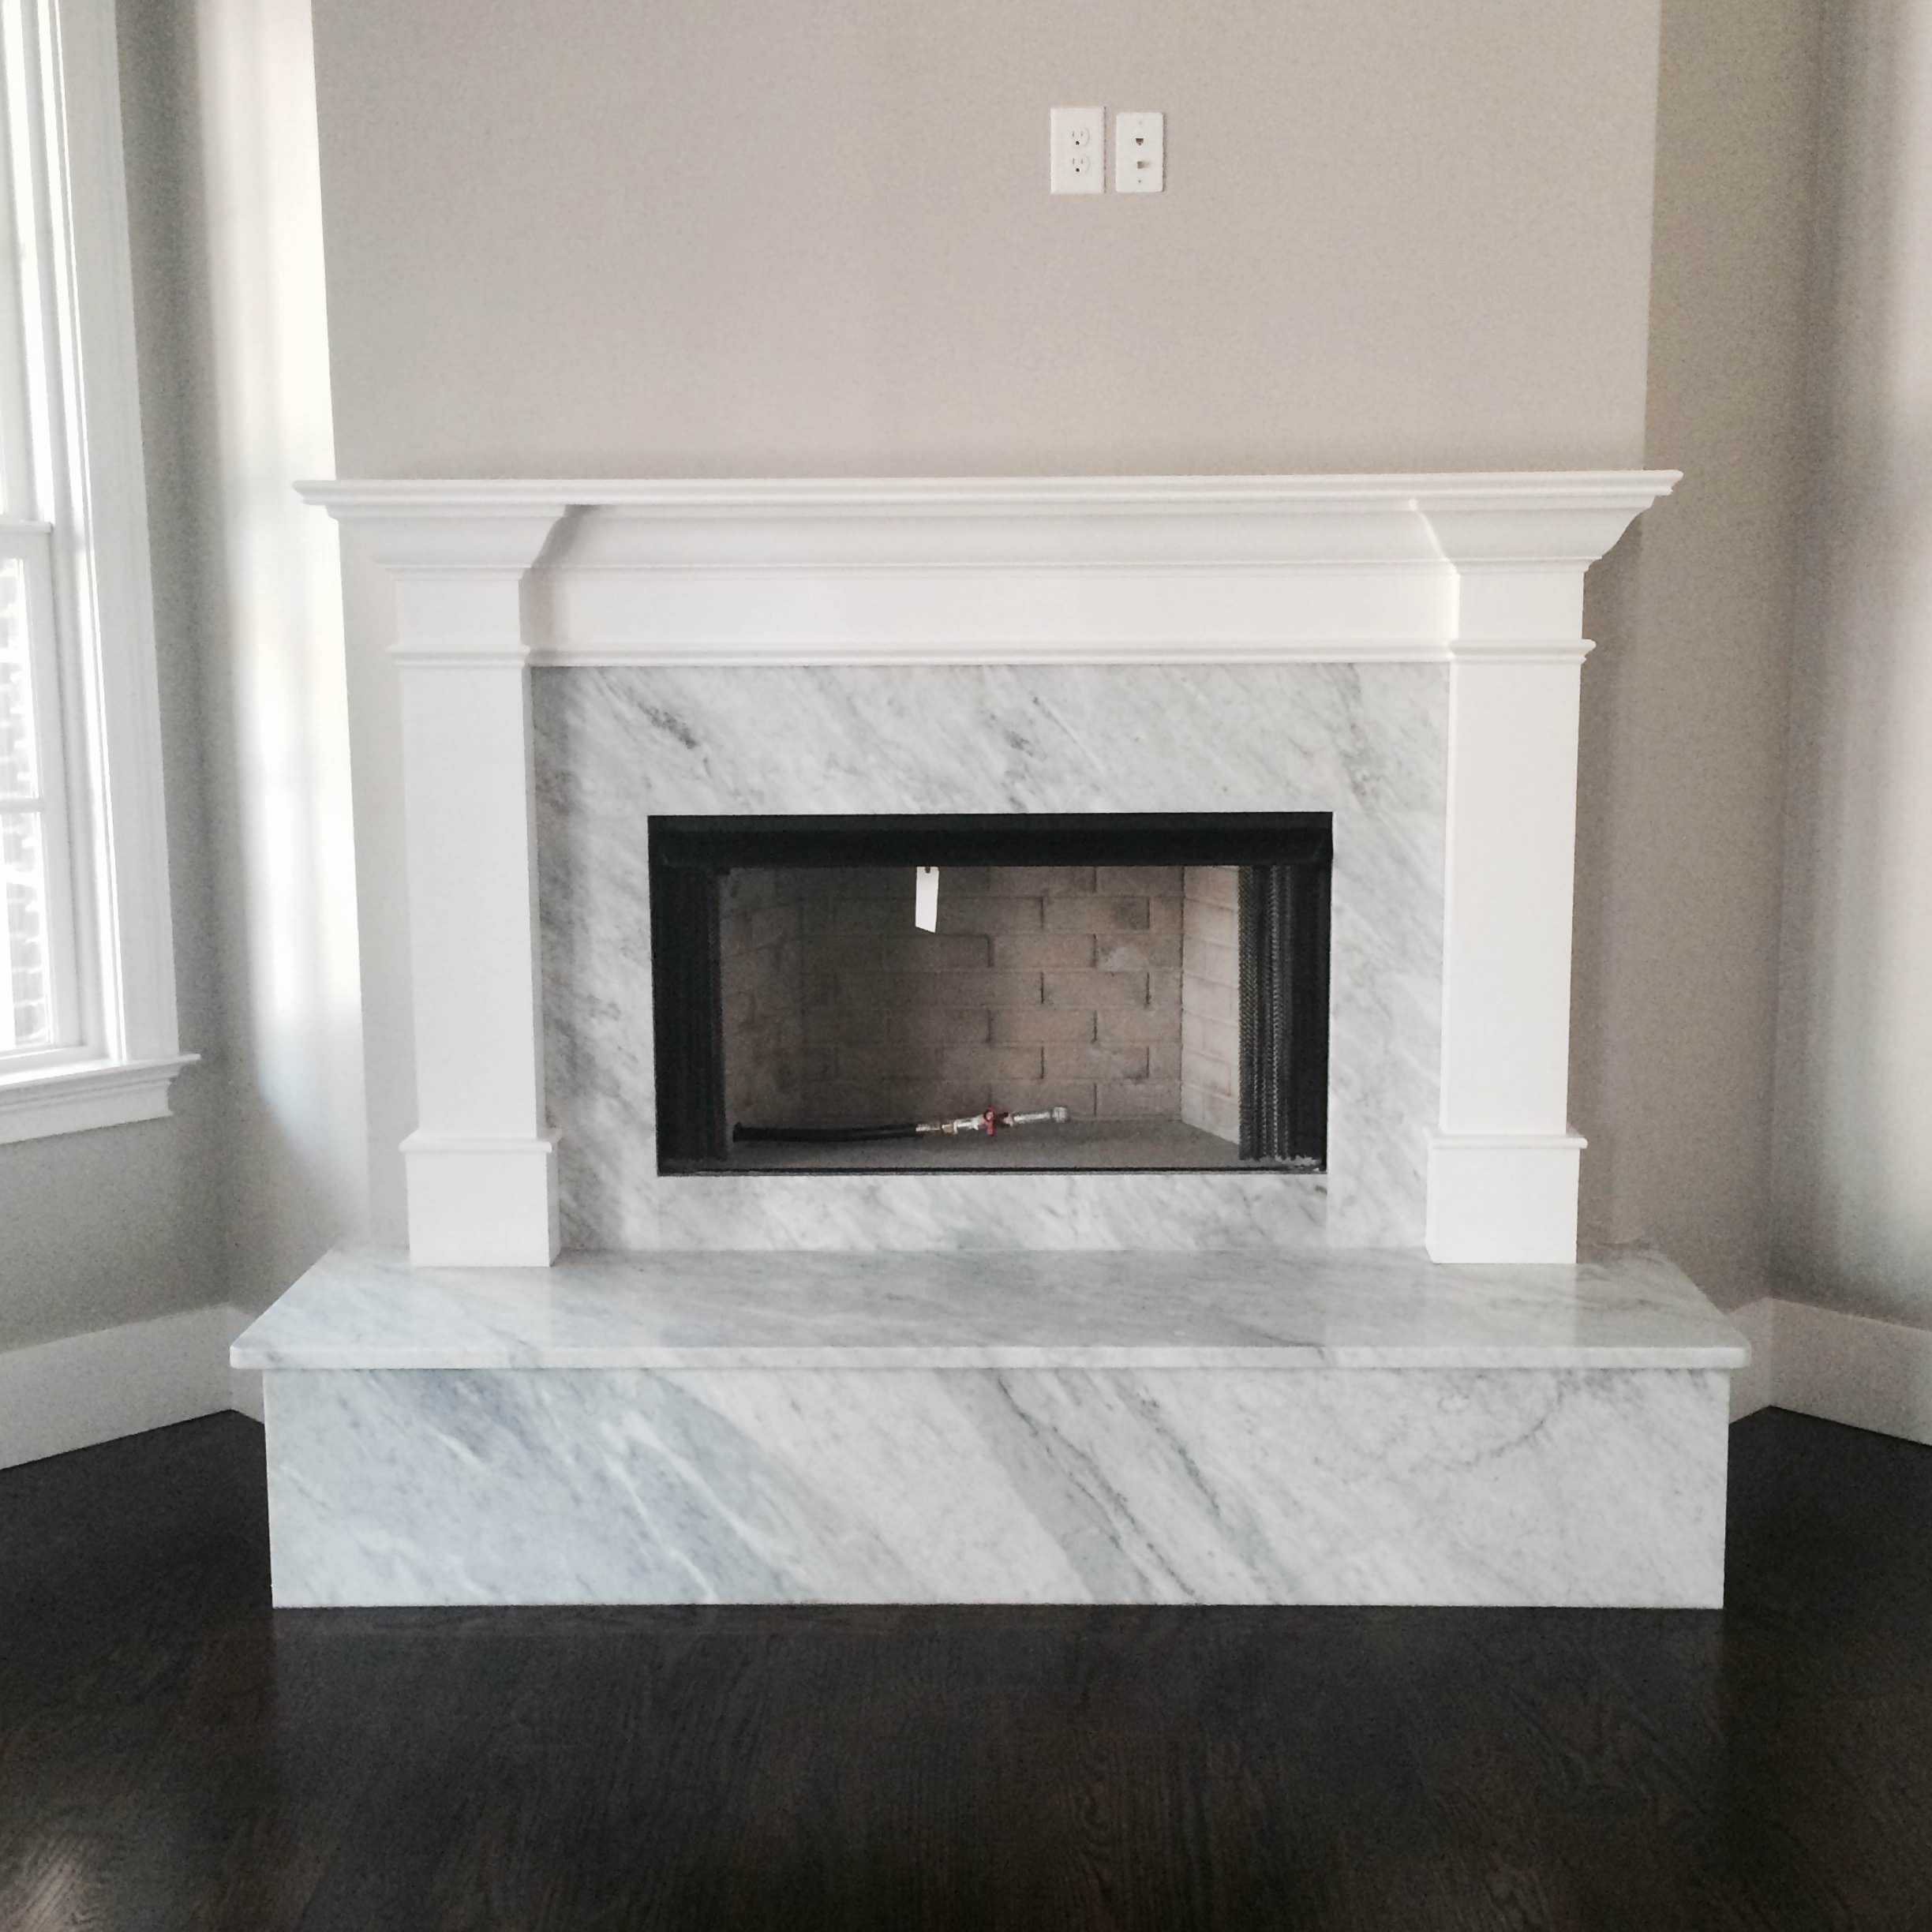 Italian Marble Fireplace Houzz, Marble Fireplace Surround Cost